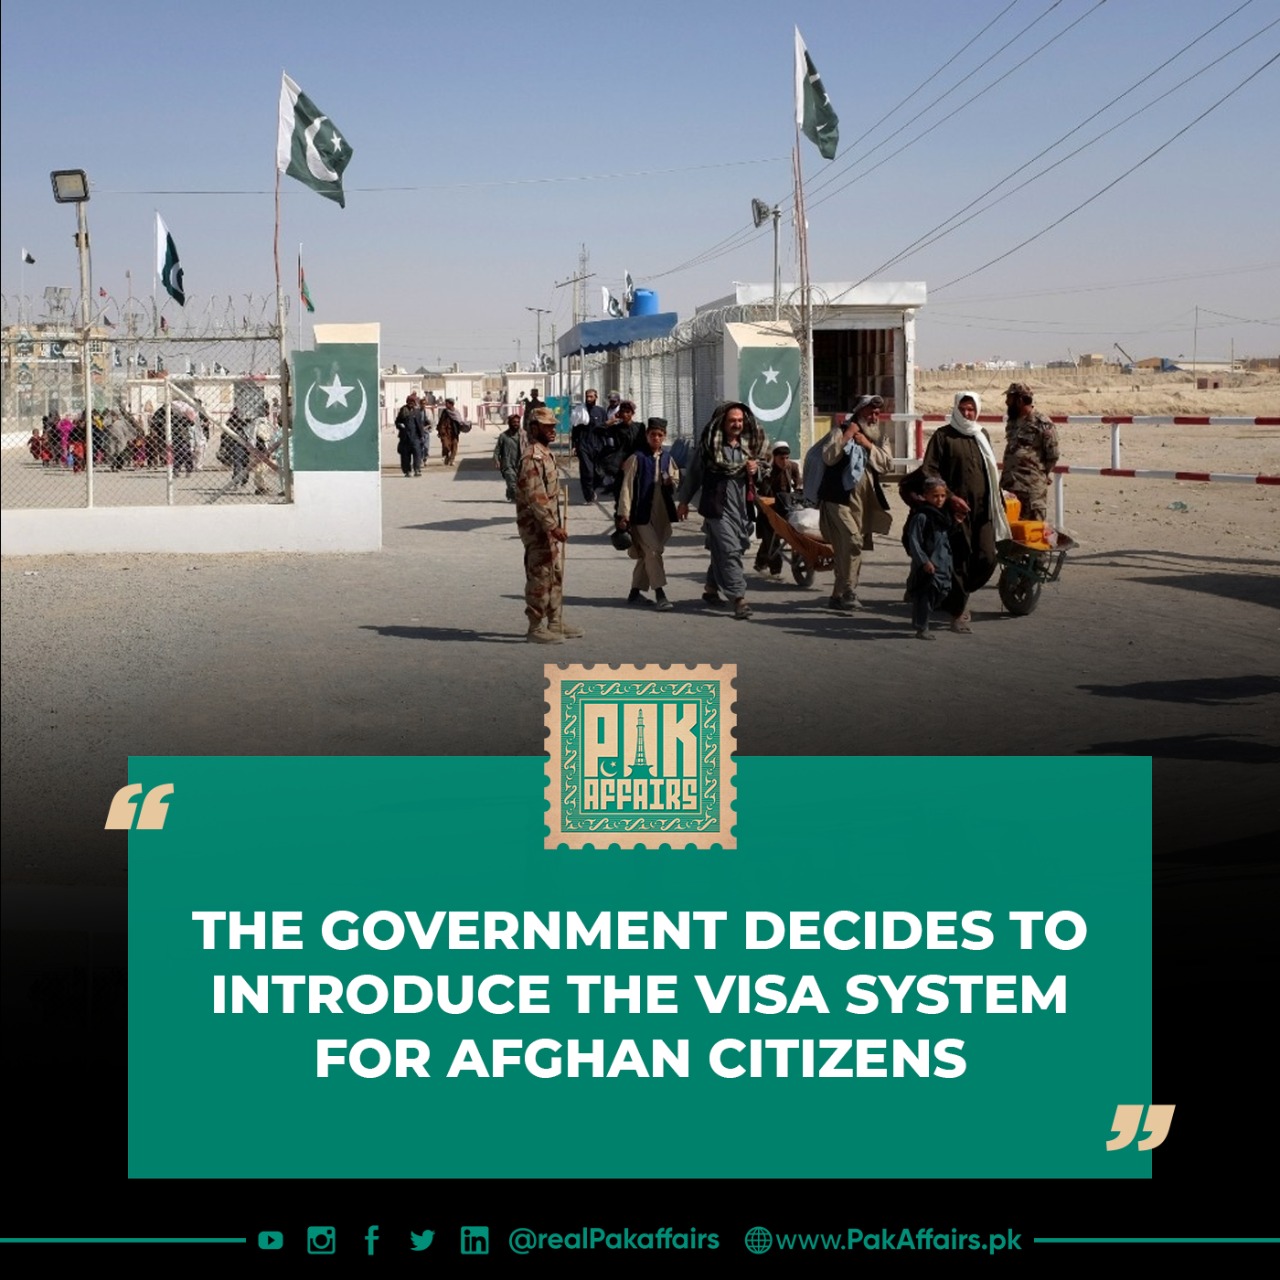 The government decides to introduce the visa system for Afghan citizens